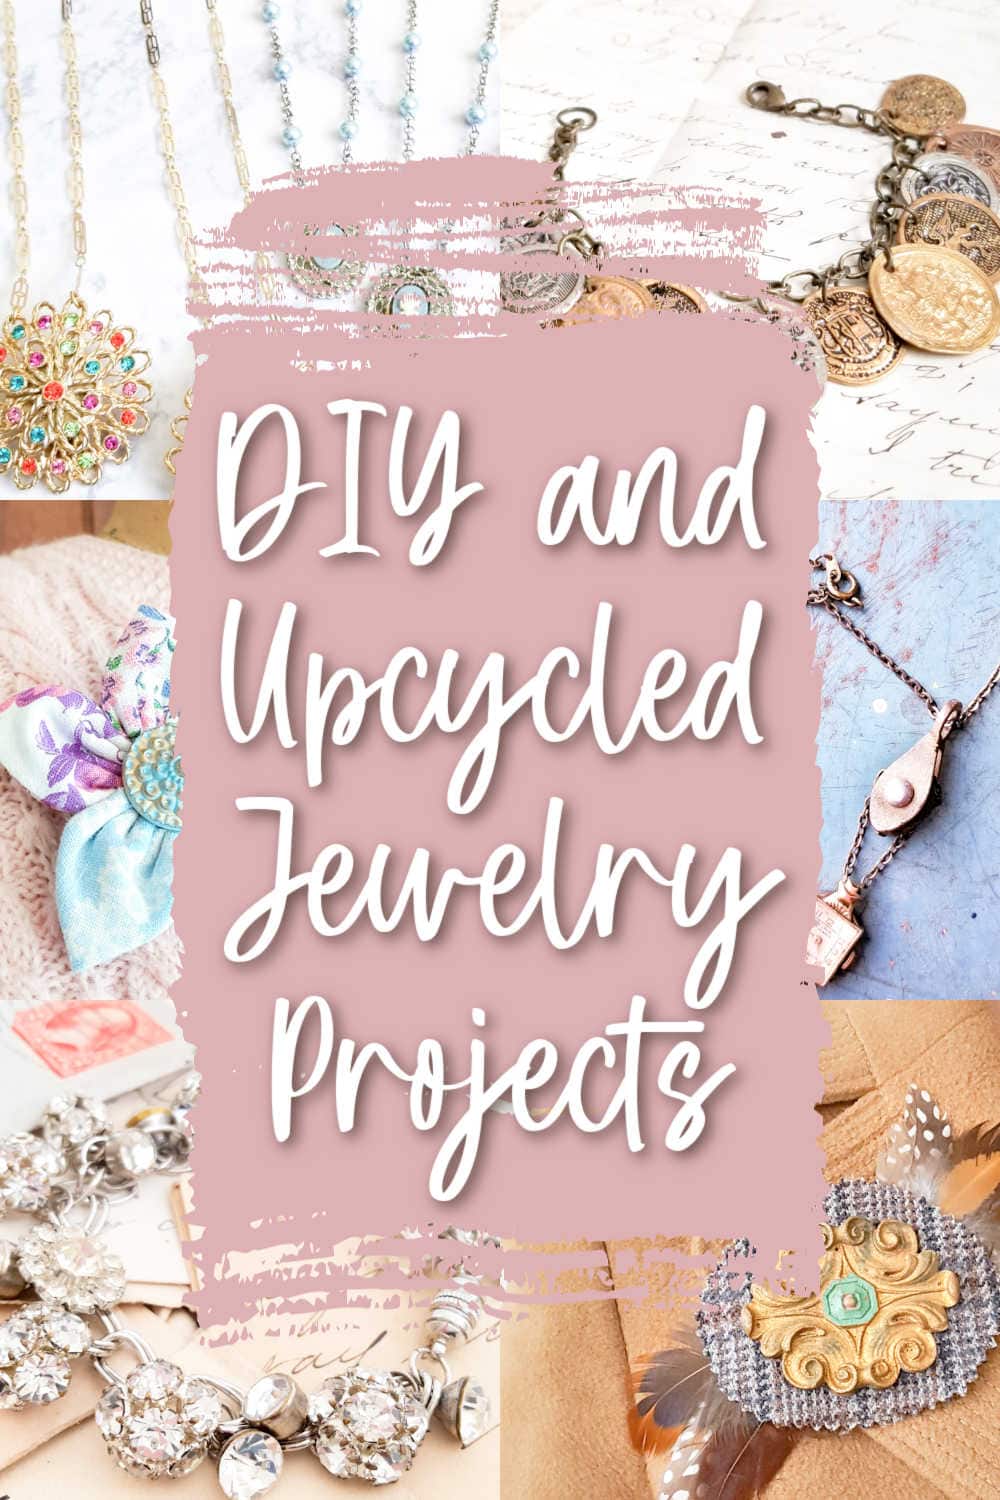 repurposed jewelry ideas and craft projects